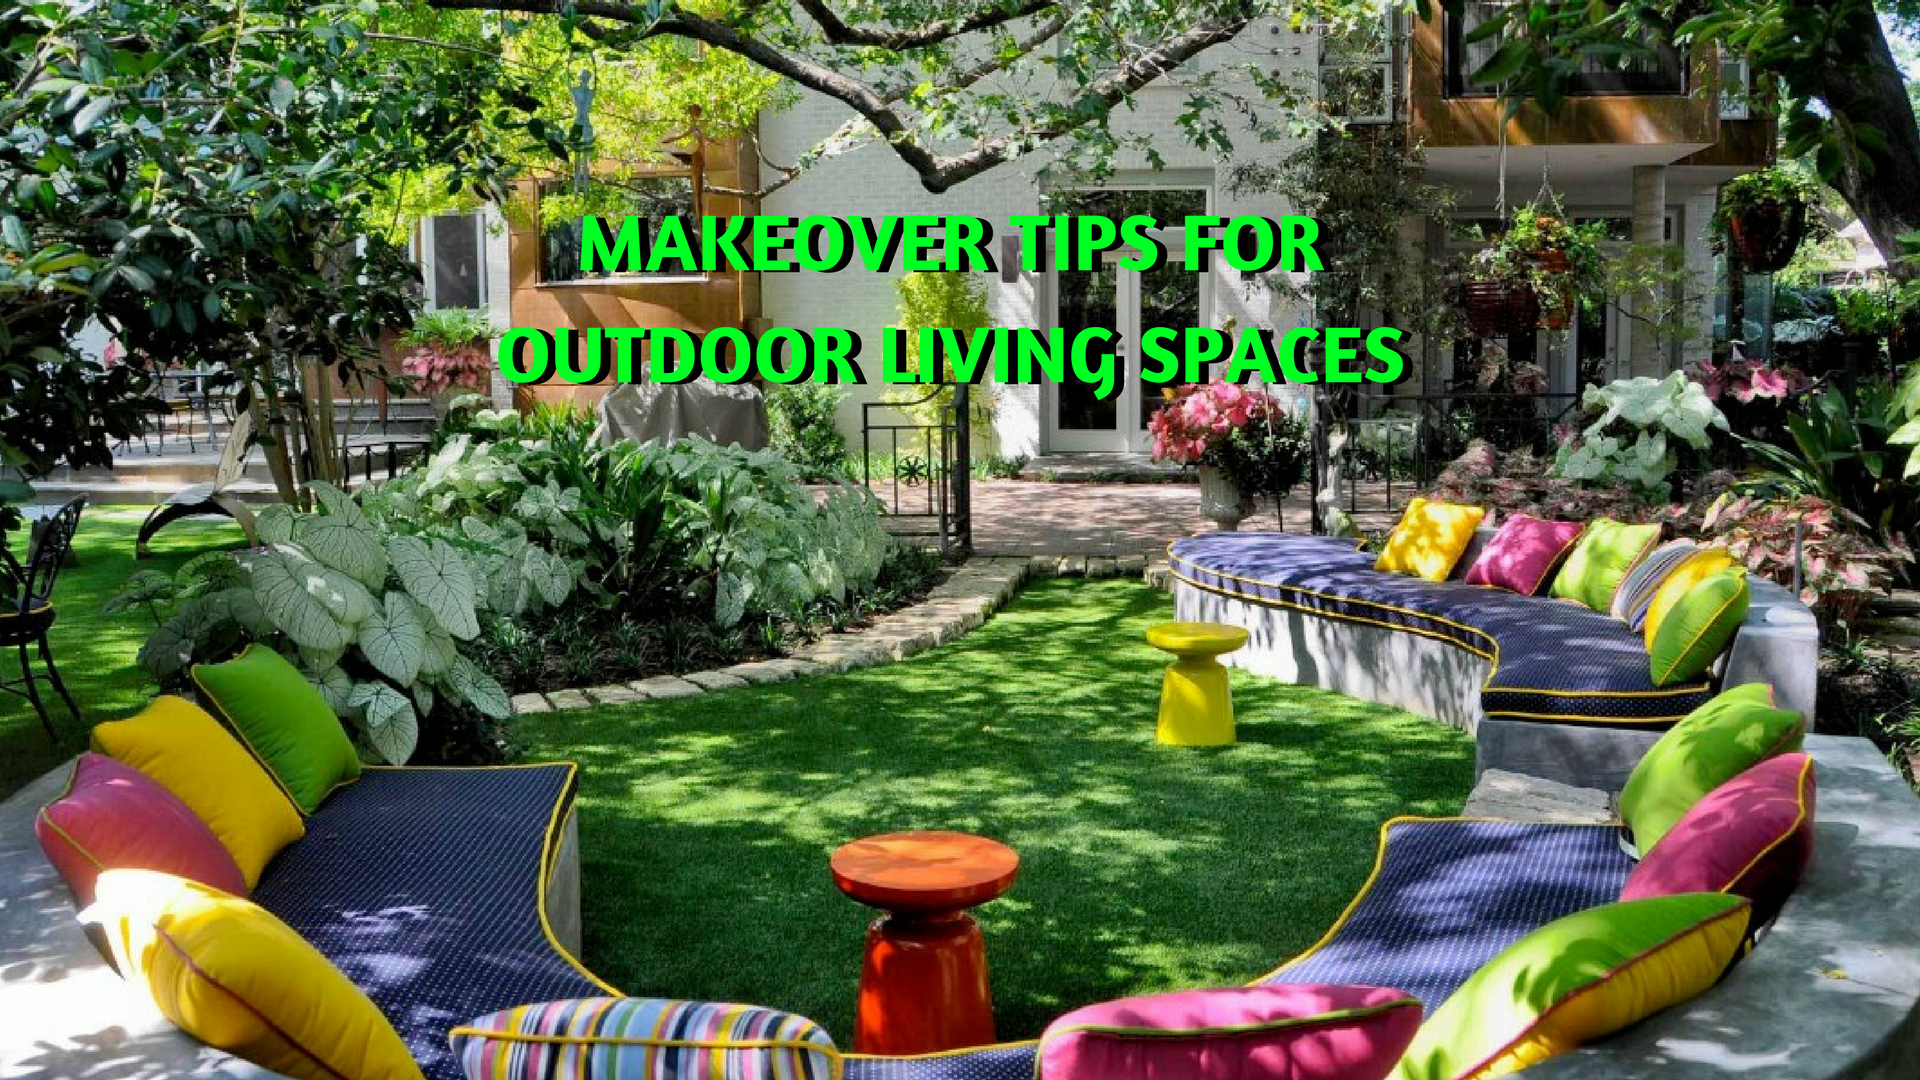 Tips For Outdoor Living Spaces.png